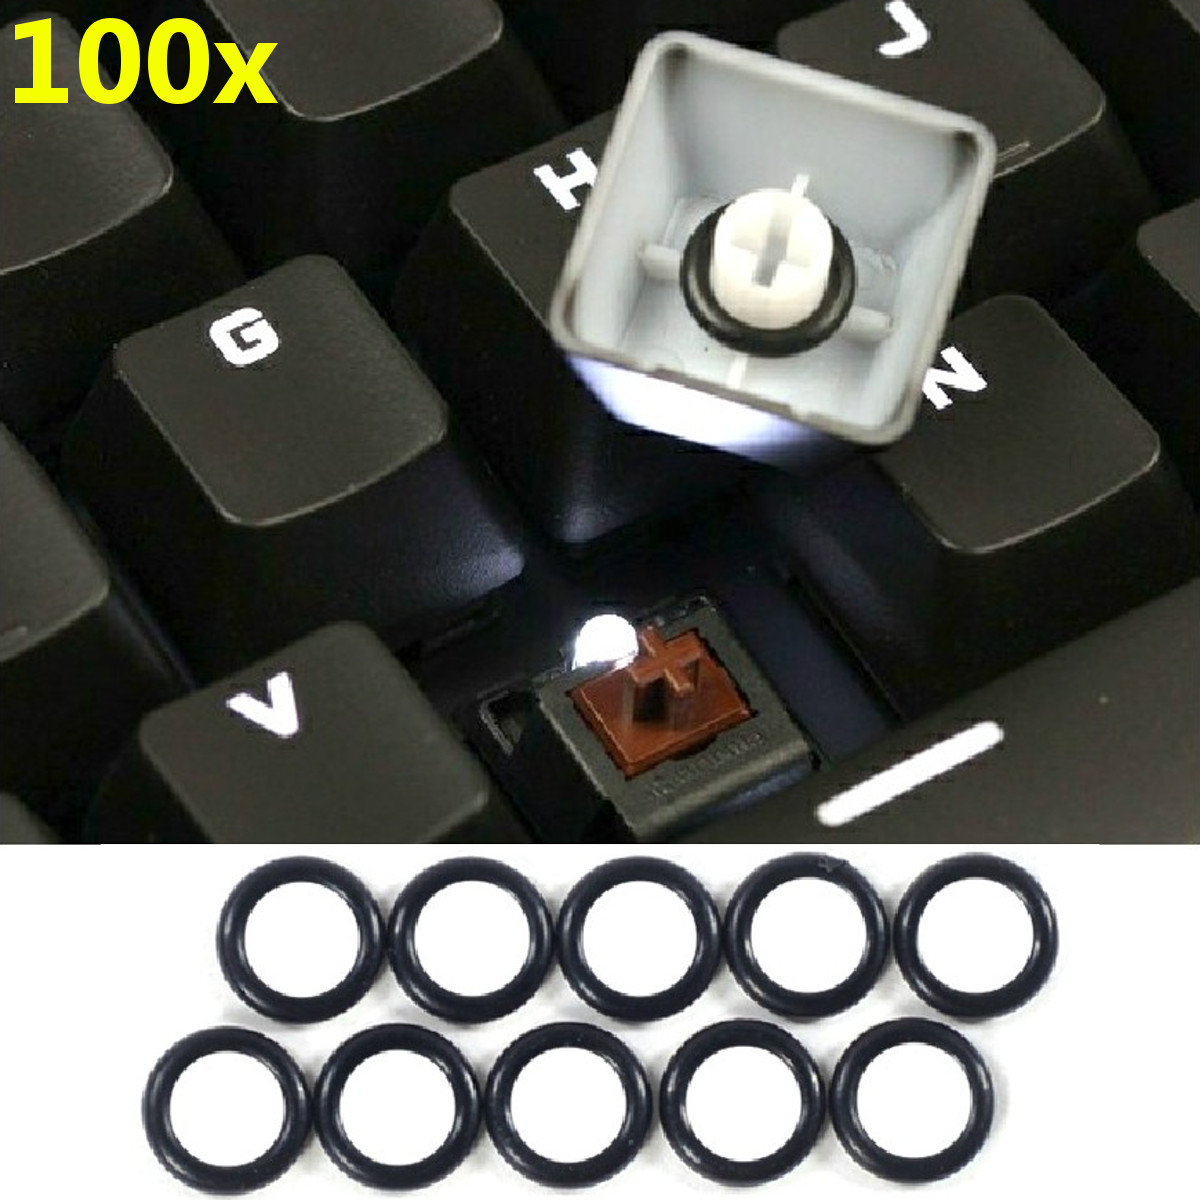 100 Mechanical Keyboard Keycap Rubber O-Ring Switch Dampeners for Cherry MX 28